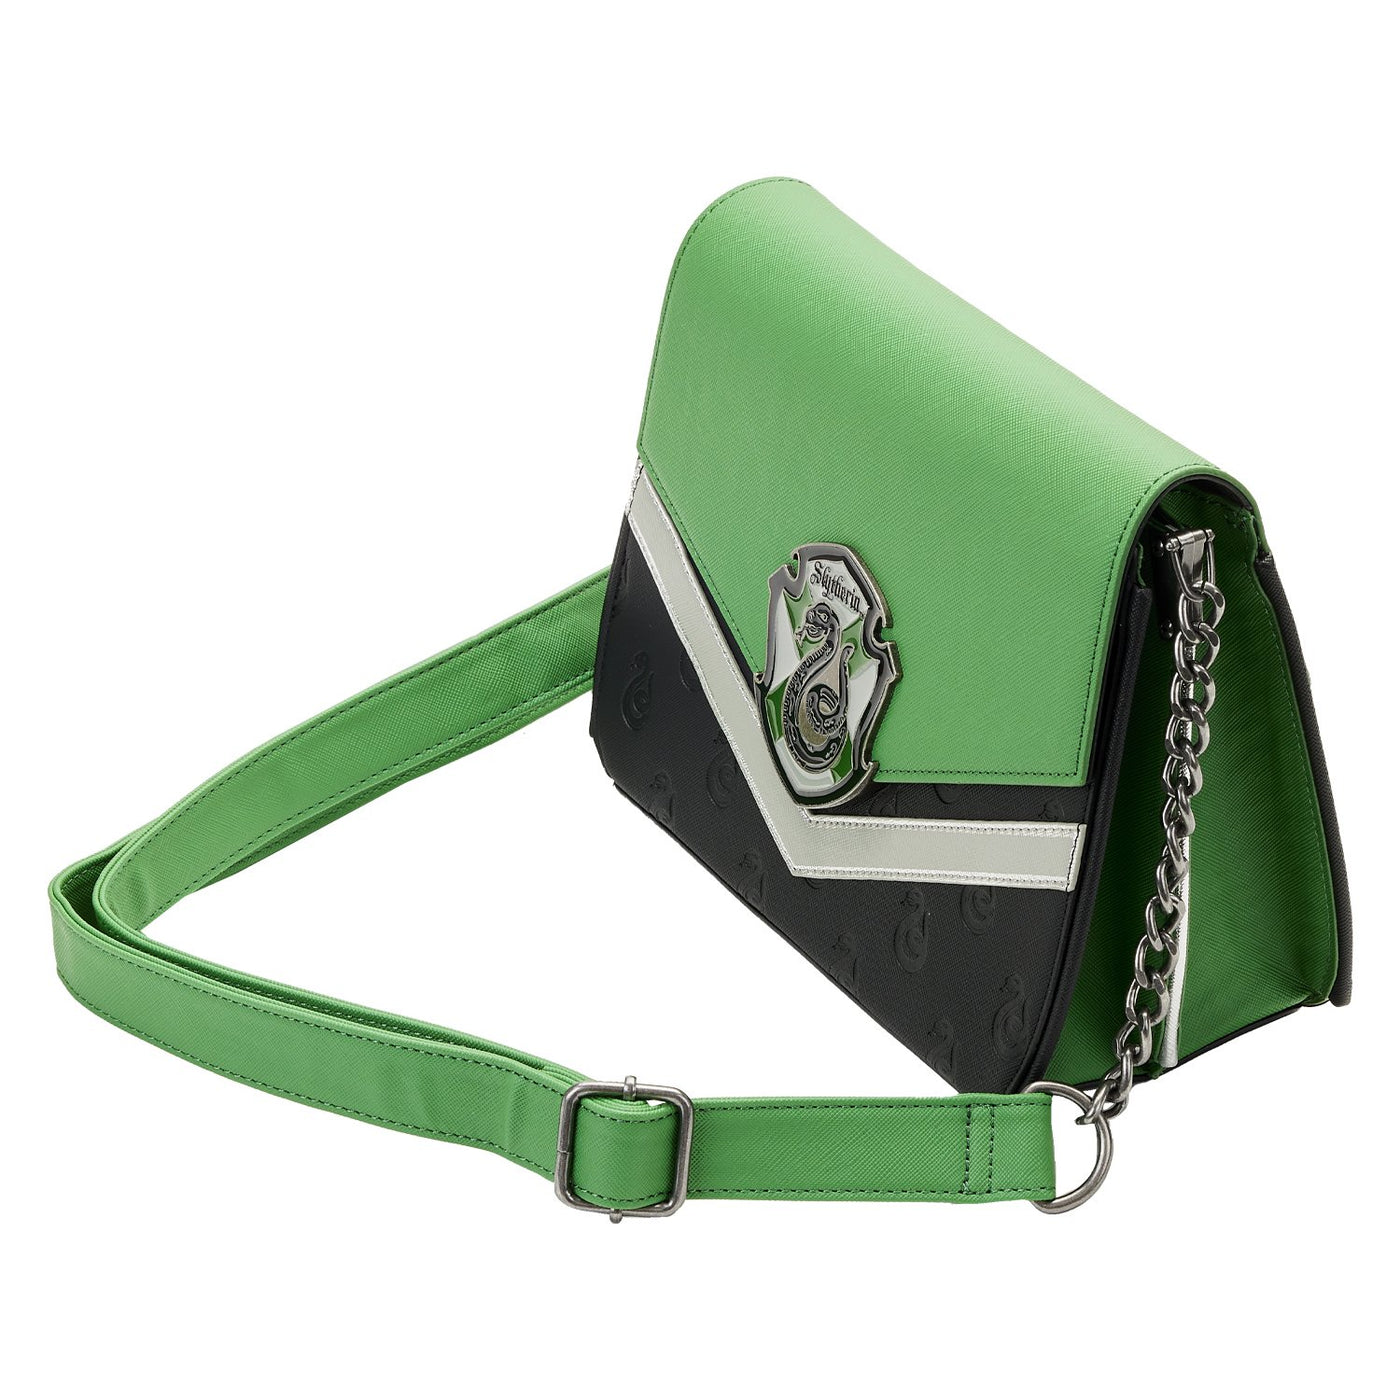 Loungefly Harry Potter Slytherin Chain Strap Crossbody - Top View